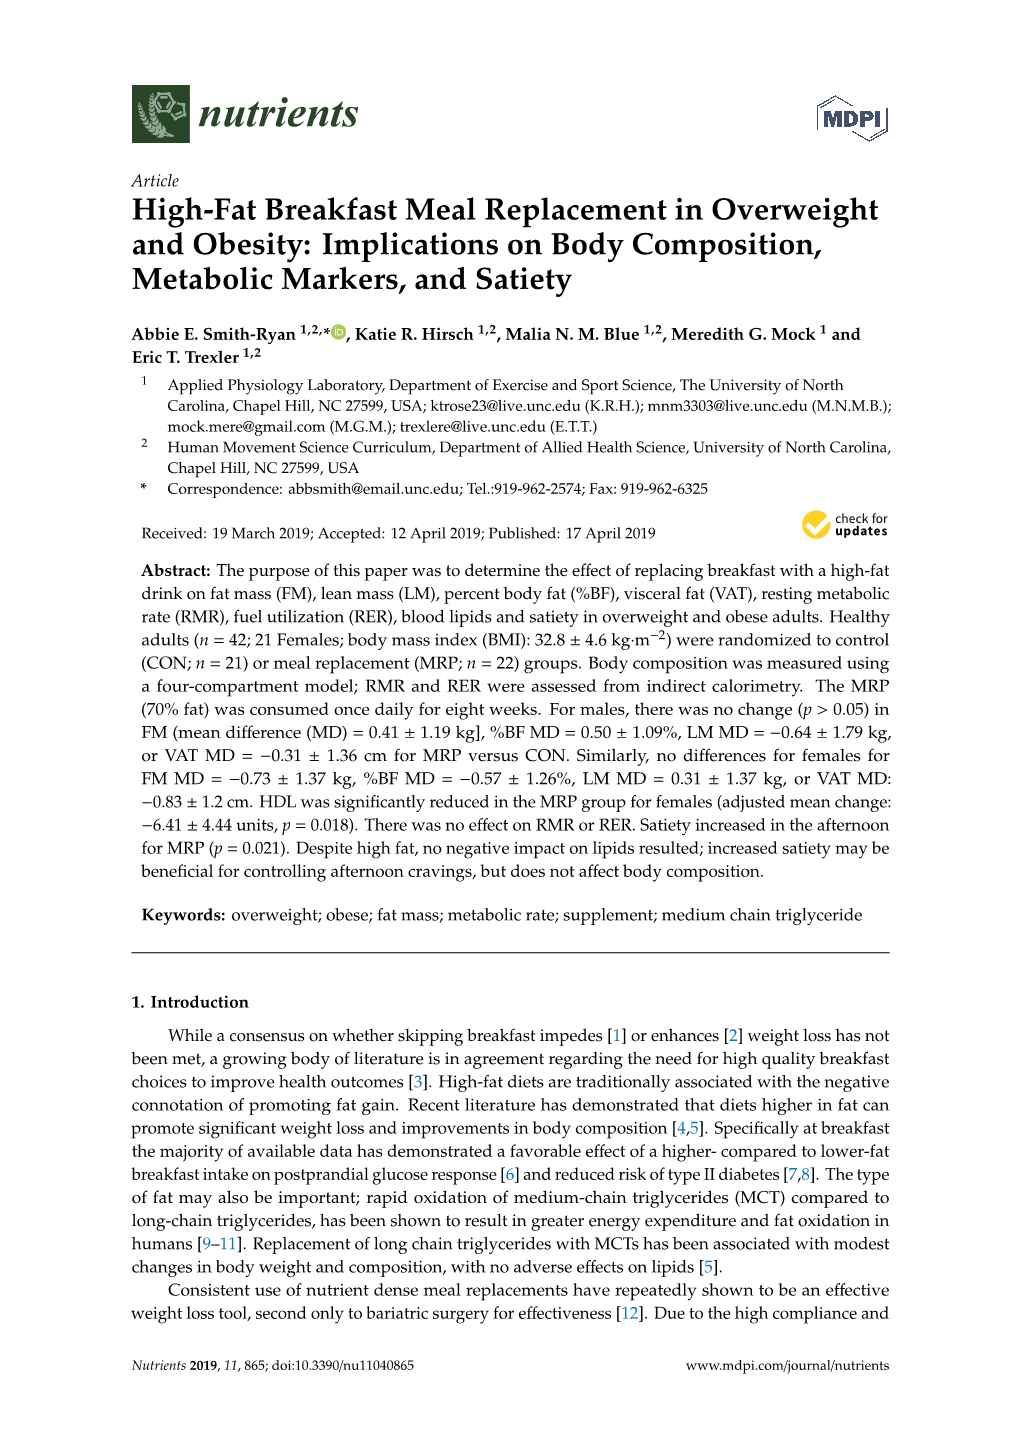 High-Fat Breakfast Meal Replacement in Overweight and Obesity: Implications on Body Composition, Metabolic Markers, and Satiety